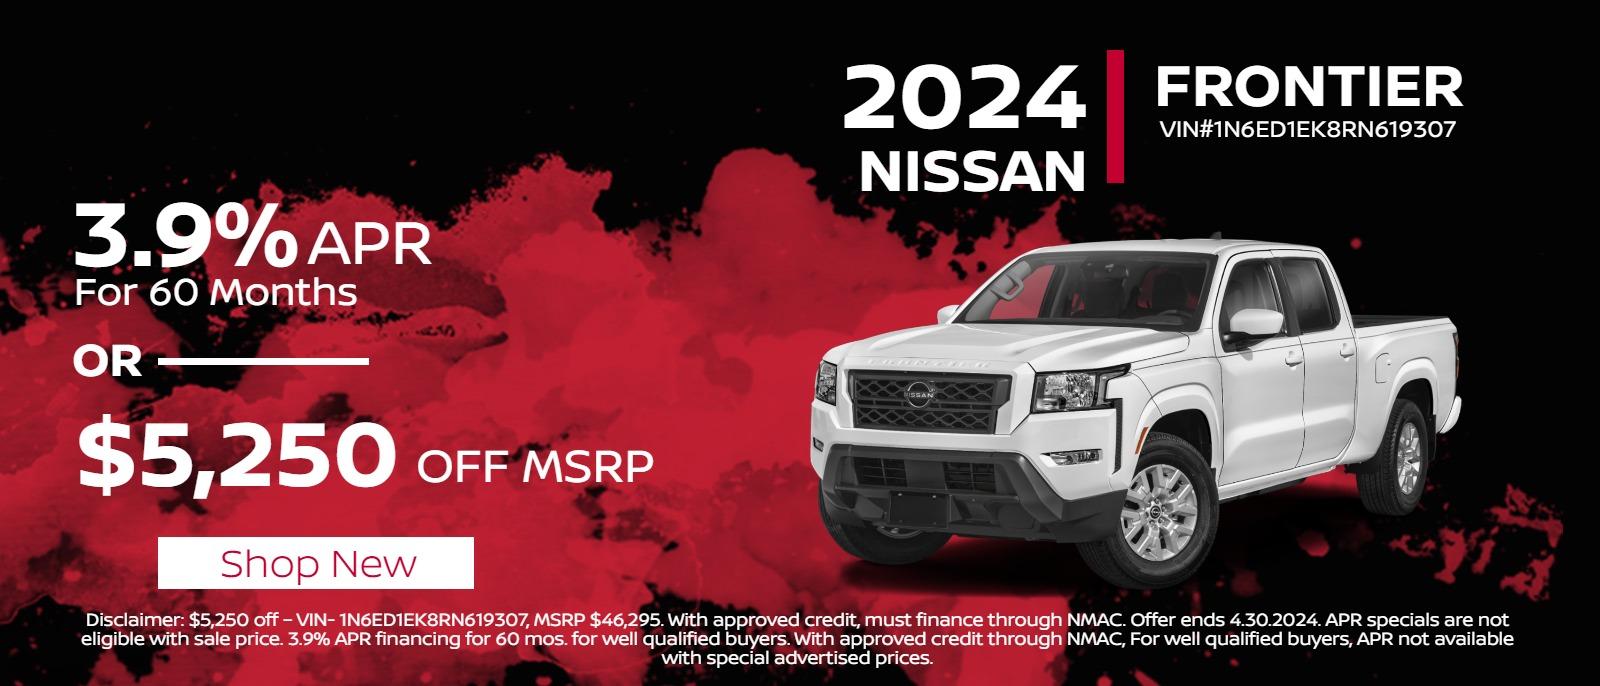 2024 Frontier 
3.9% APR for 60 months 
or 
$5,250 off MSRP